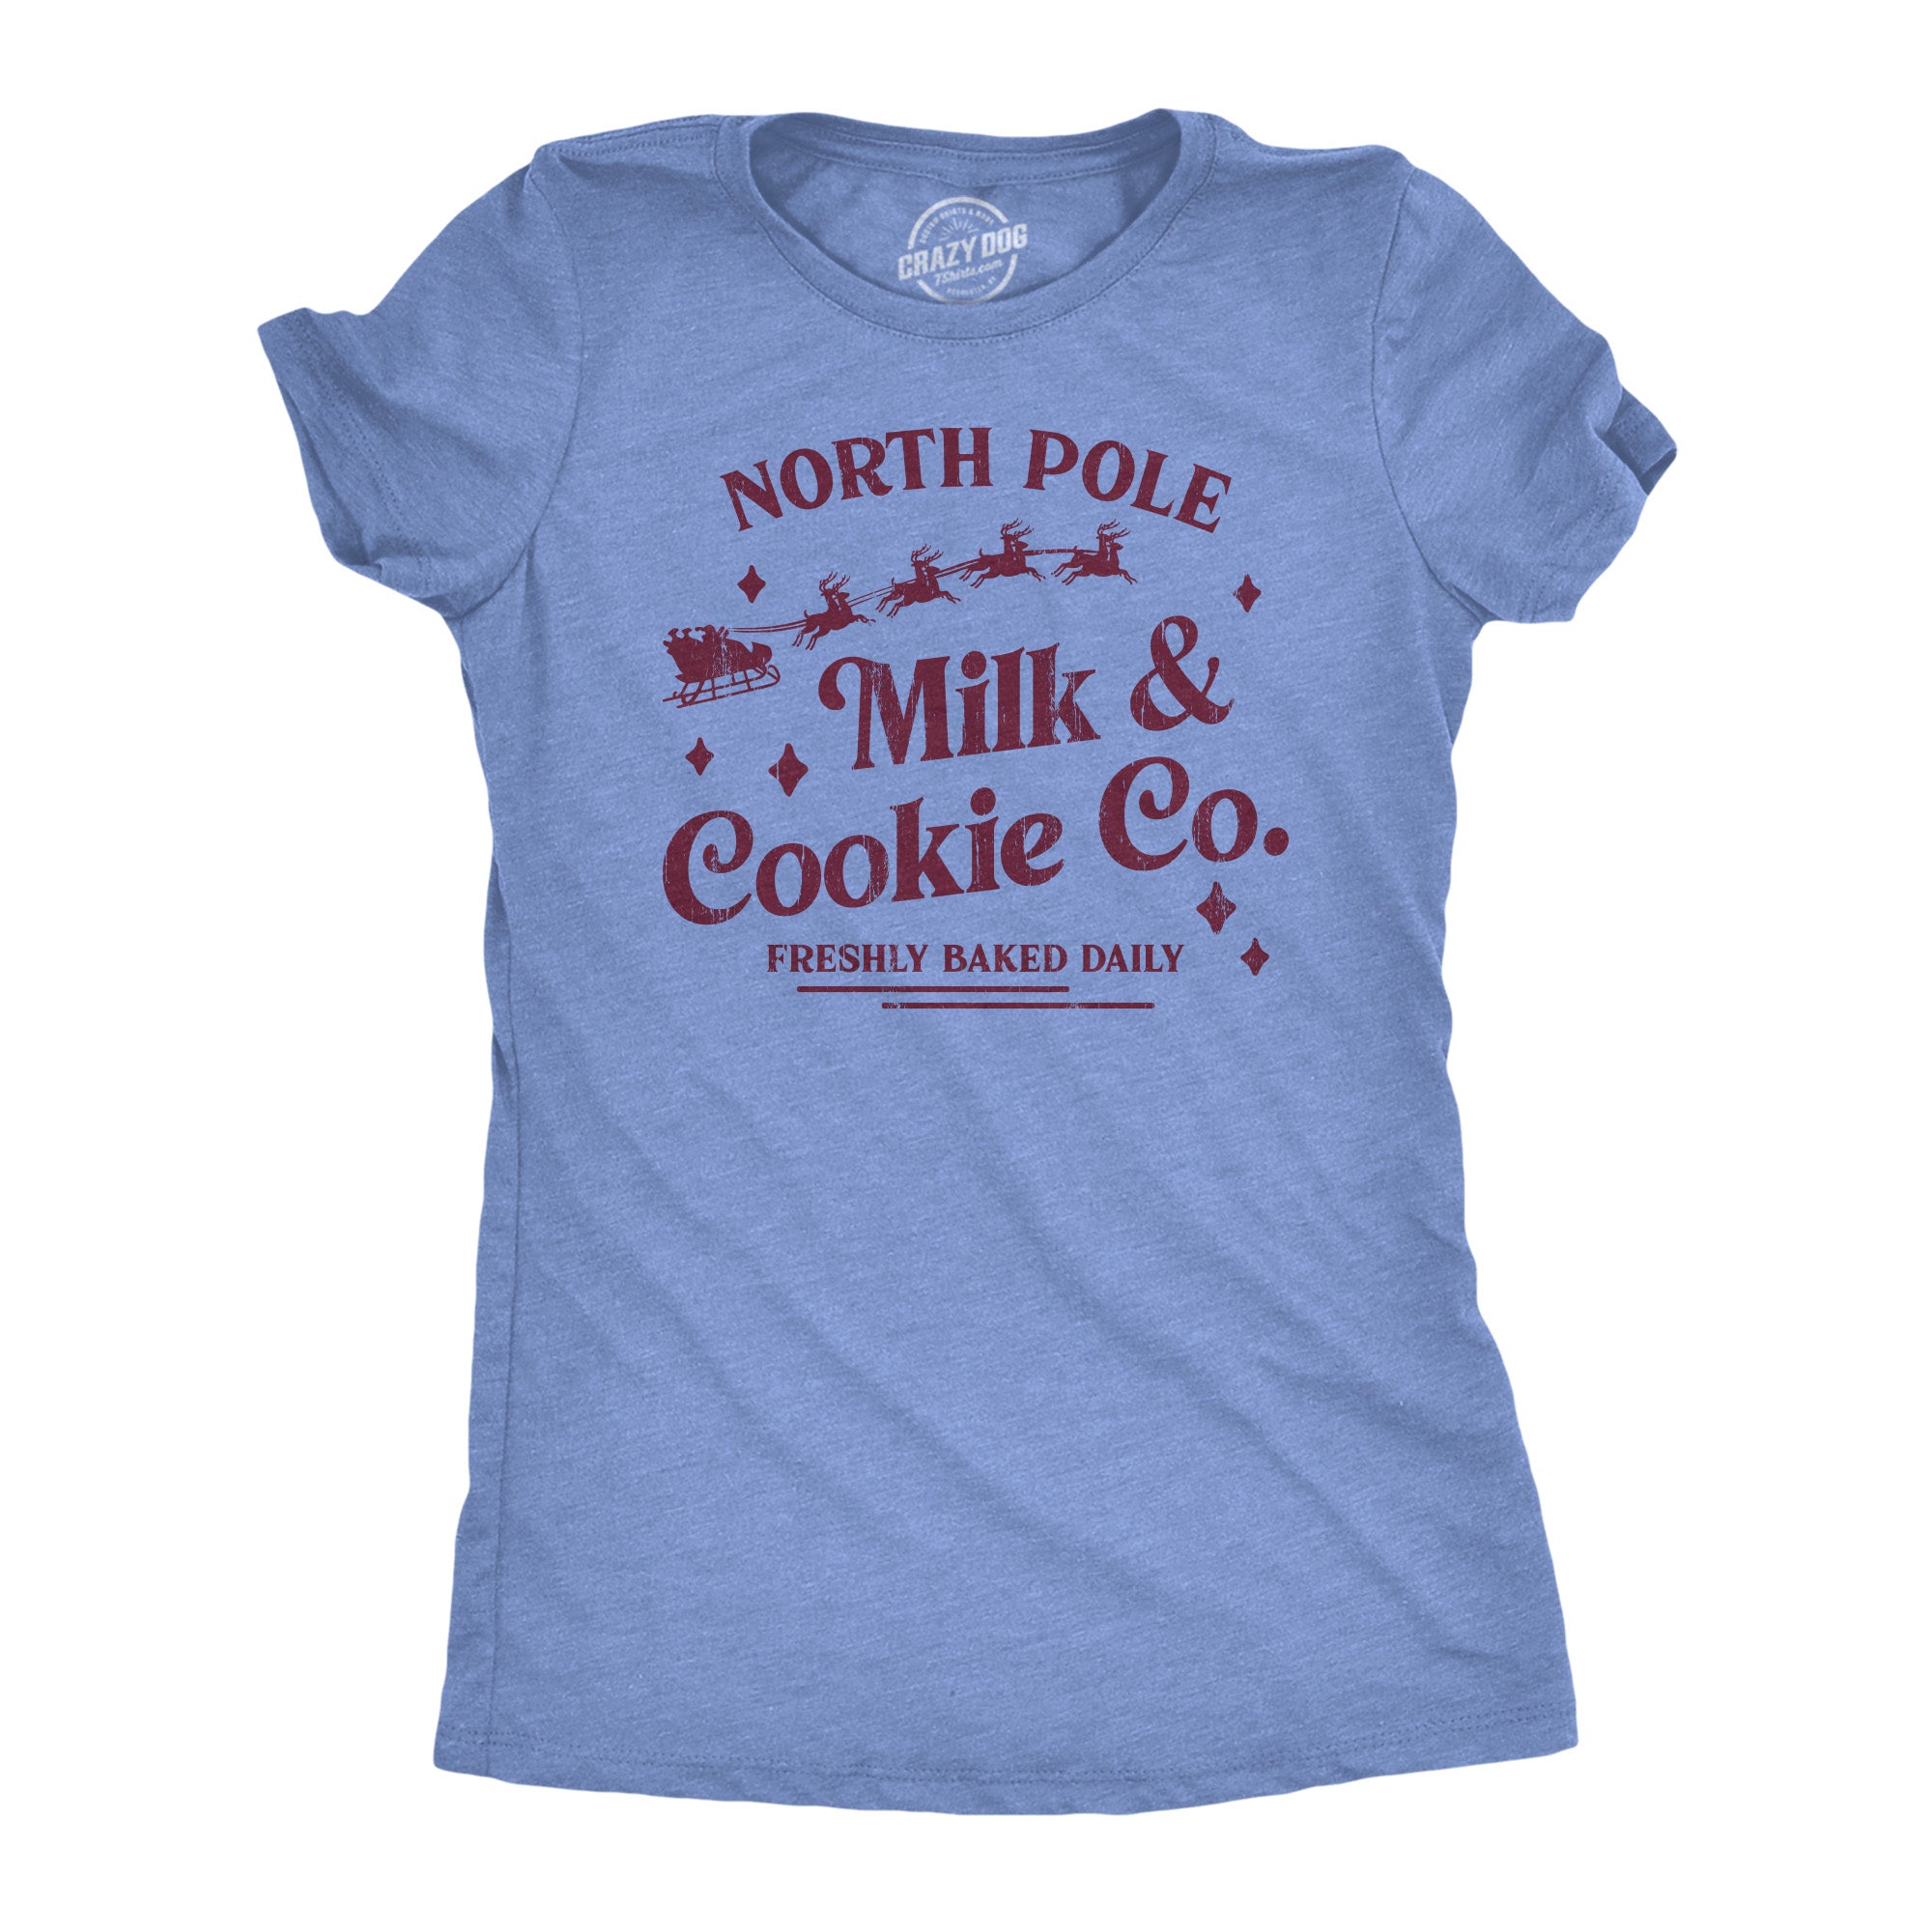 Funny Light Heather Blue - NORTHPOLE North Pole Milk And Cookie Co Womens T Shirt Nerdy Christmas Food Tee